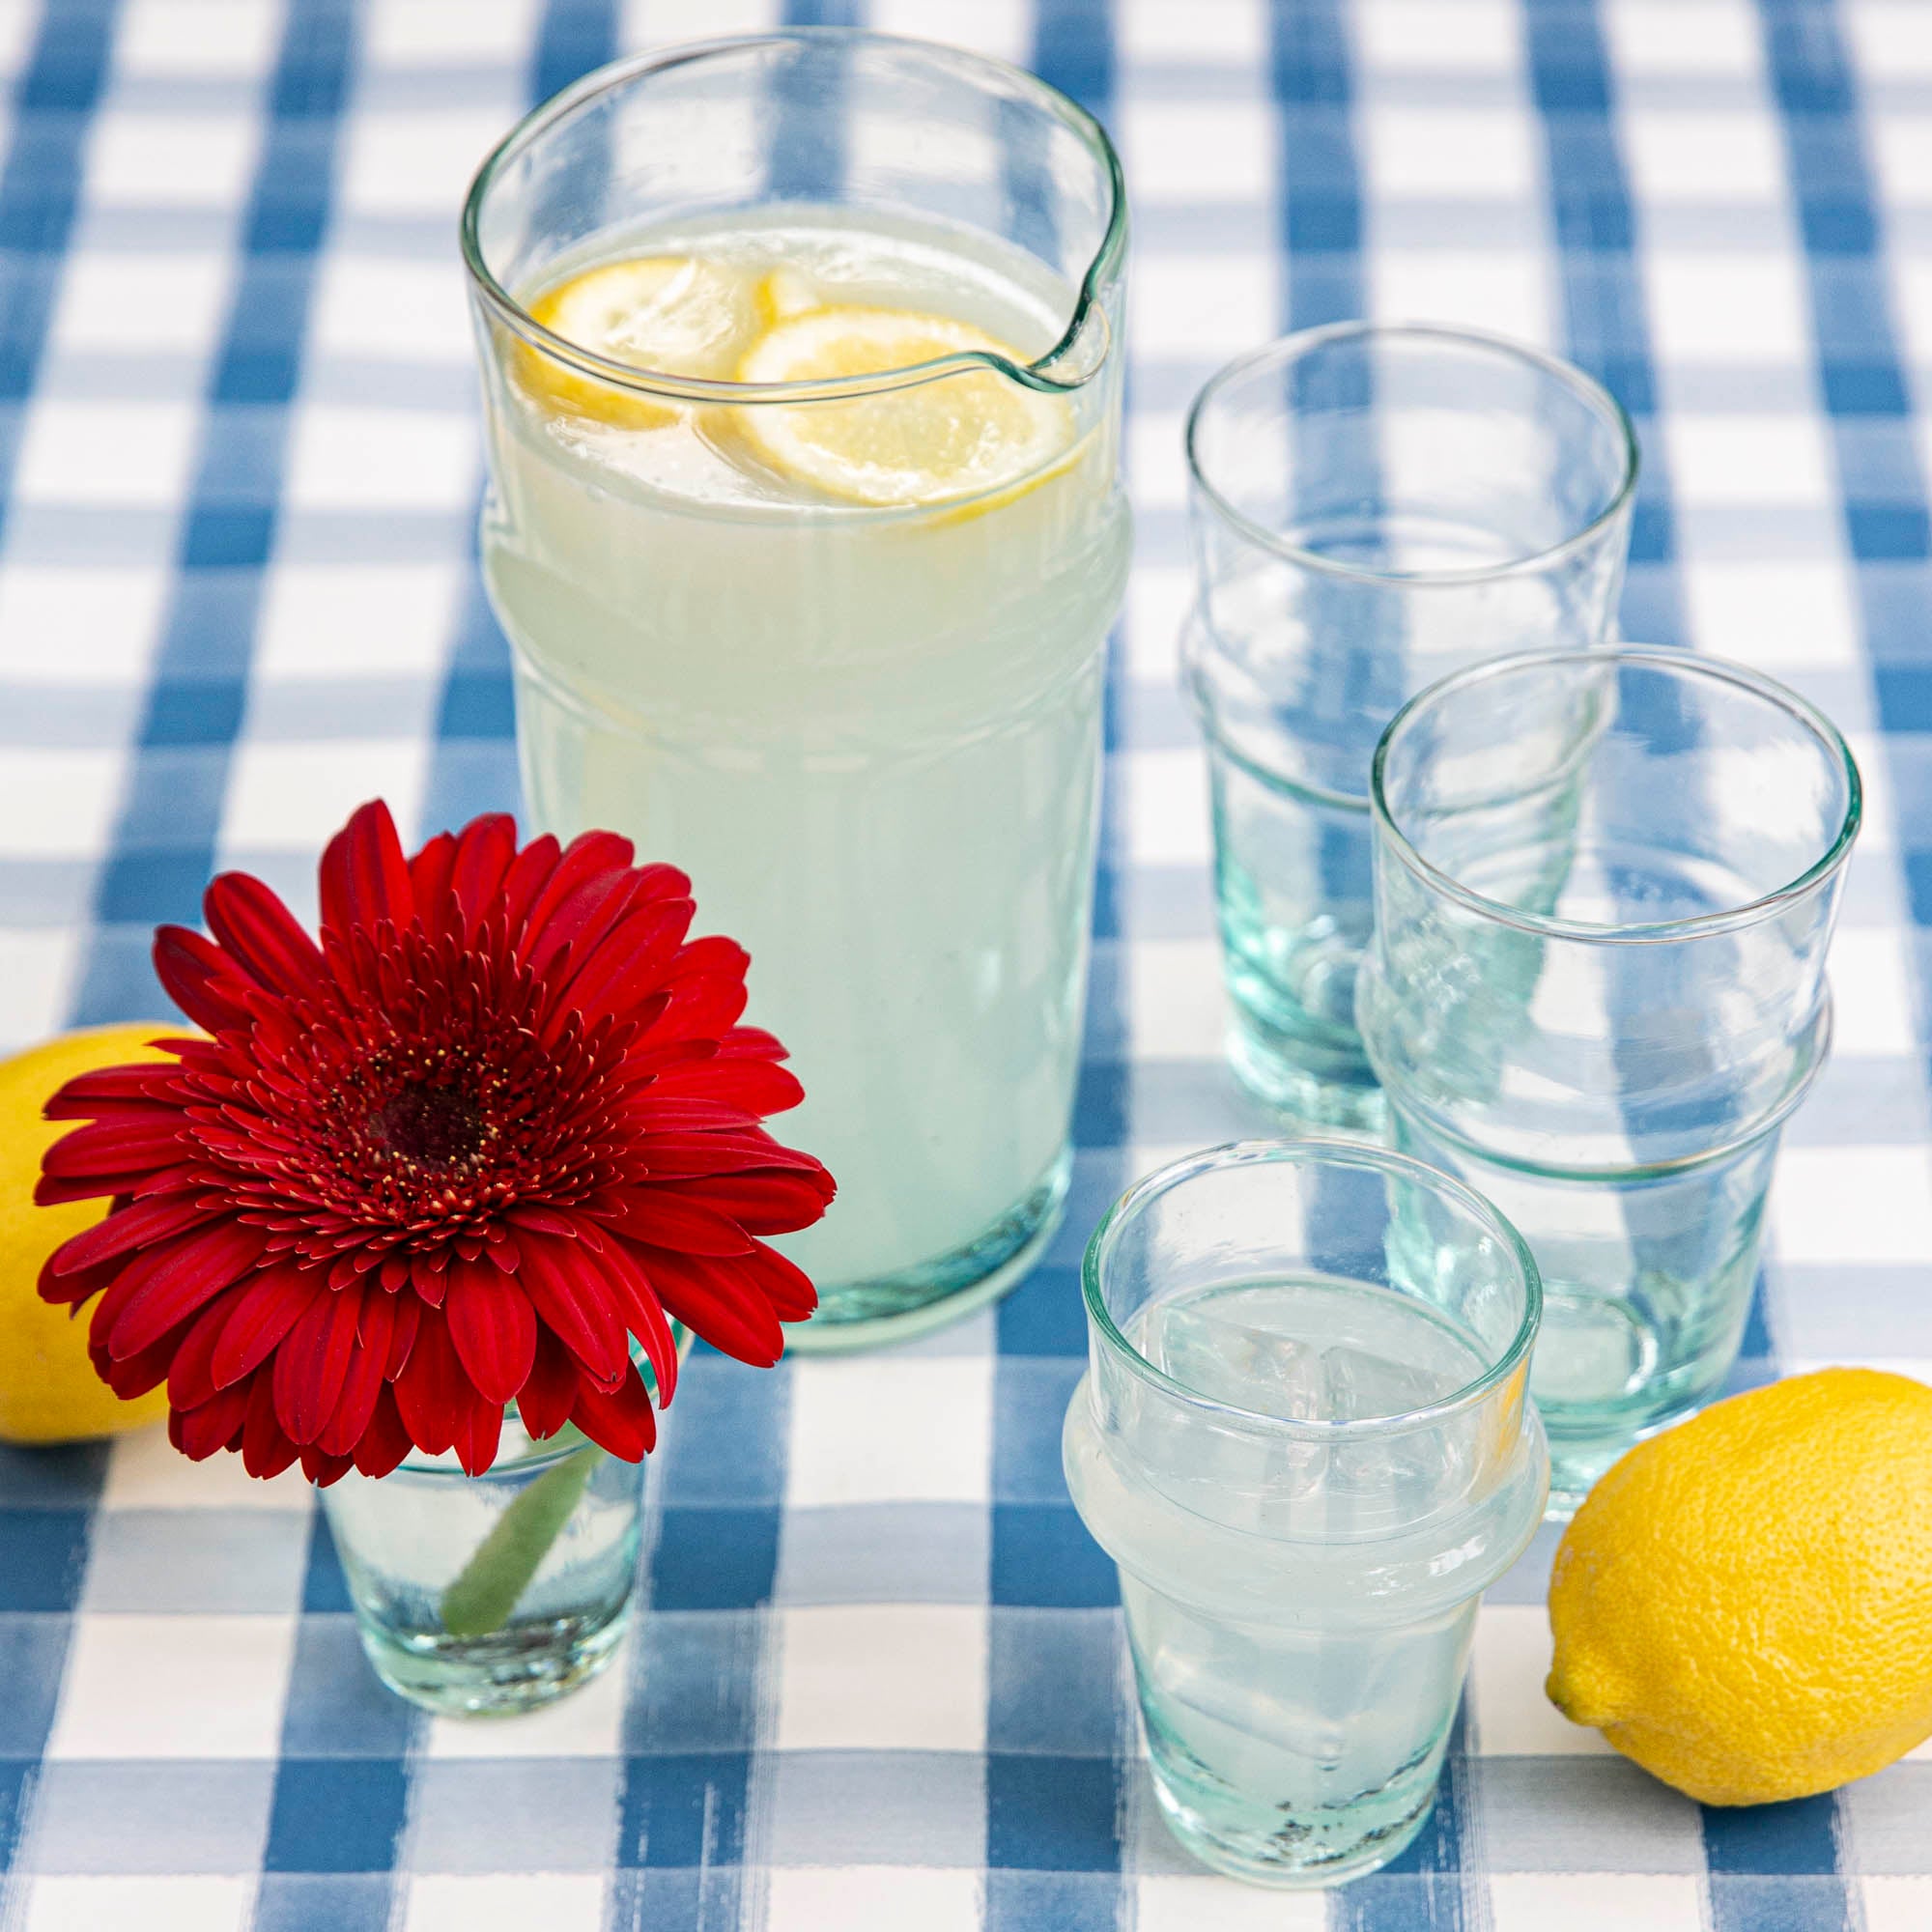 A pitcher of lemonade in a Clear Beldi Glassware on a blue and white checkered tablecloth.